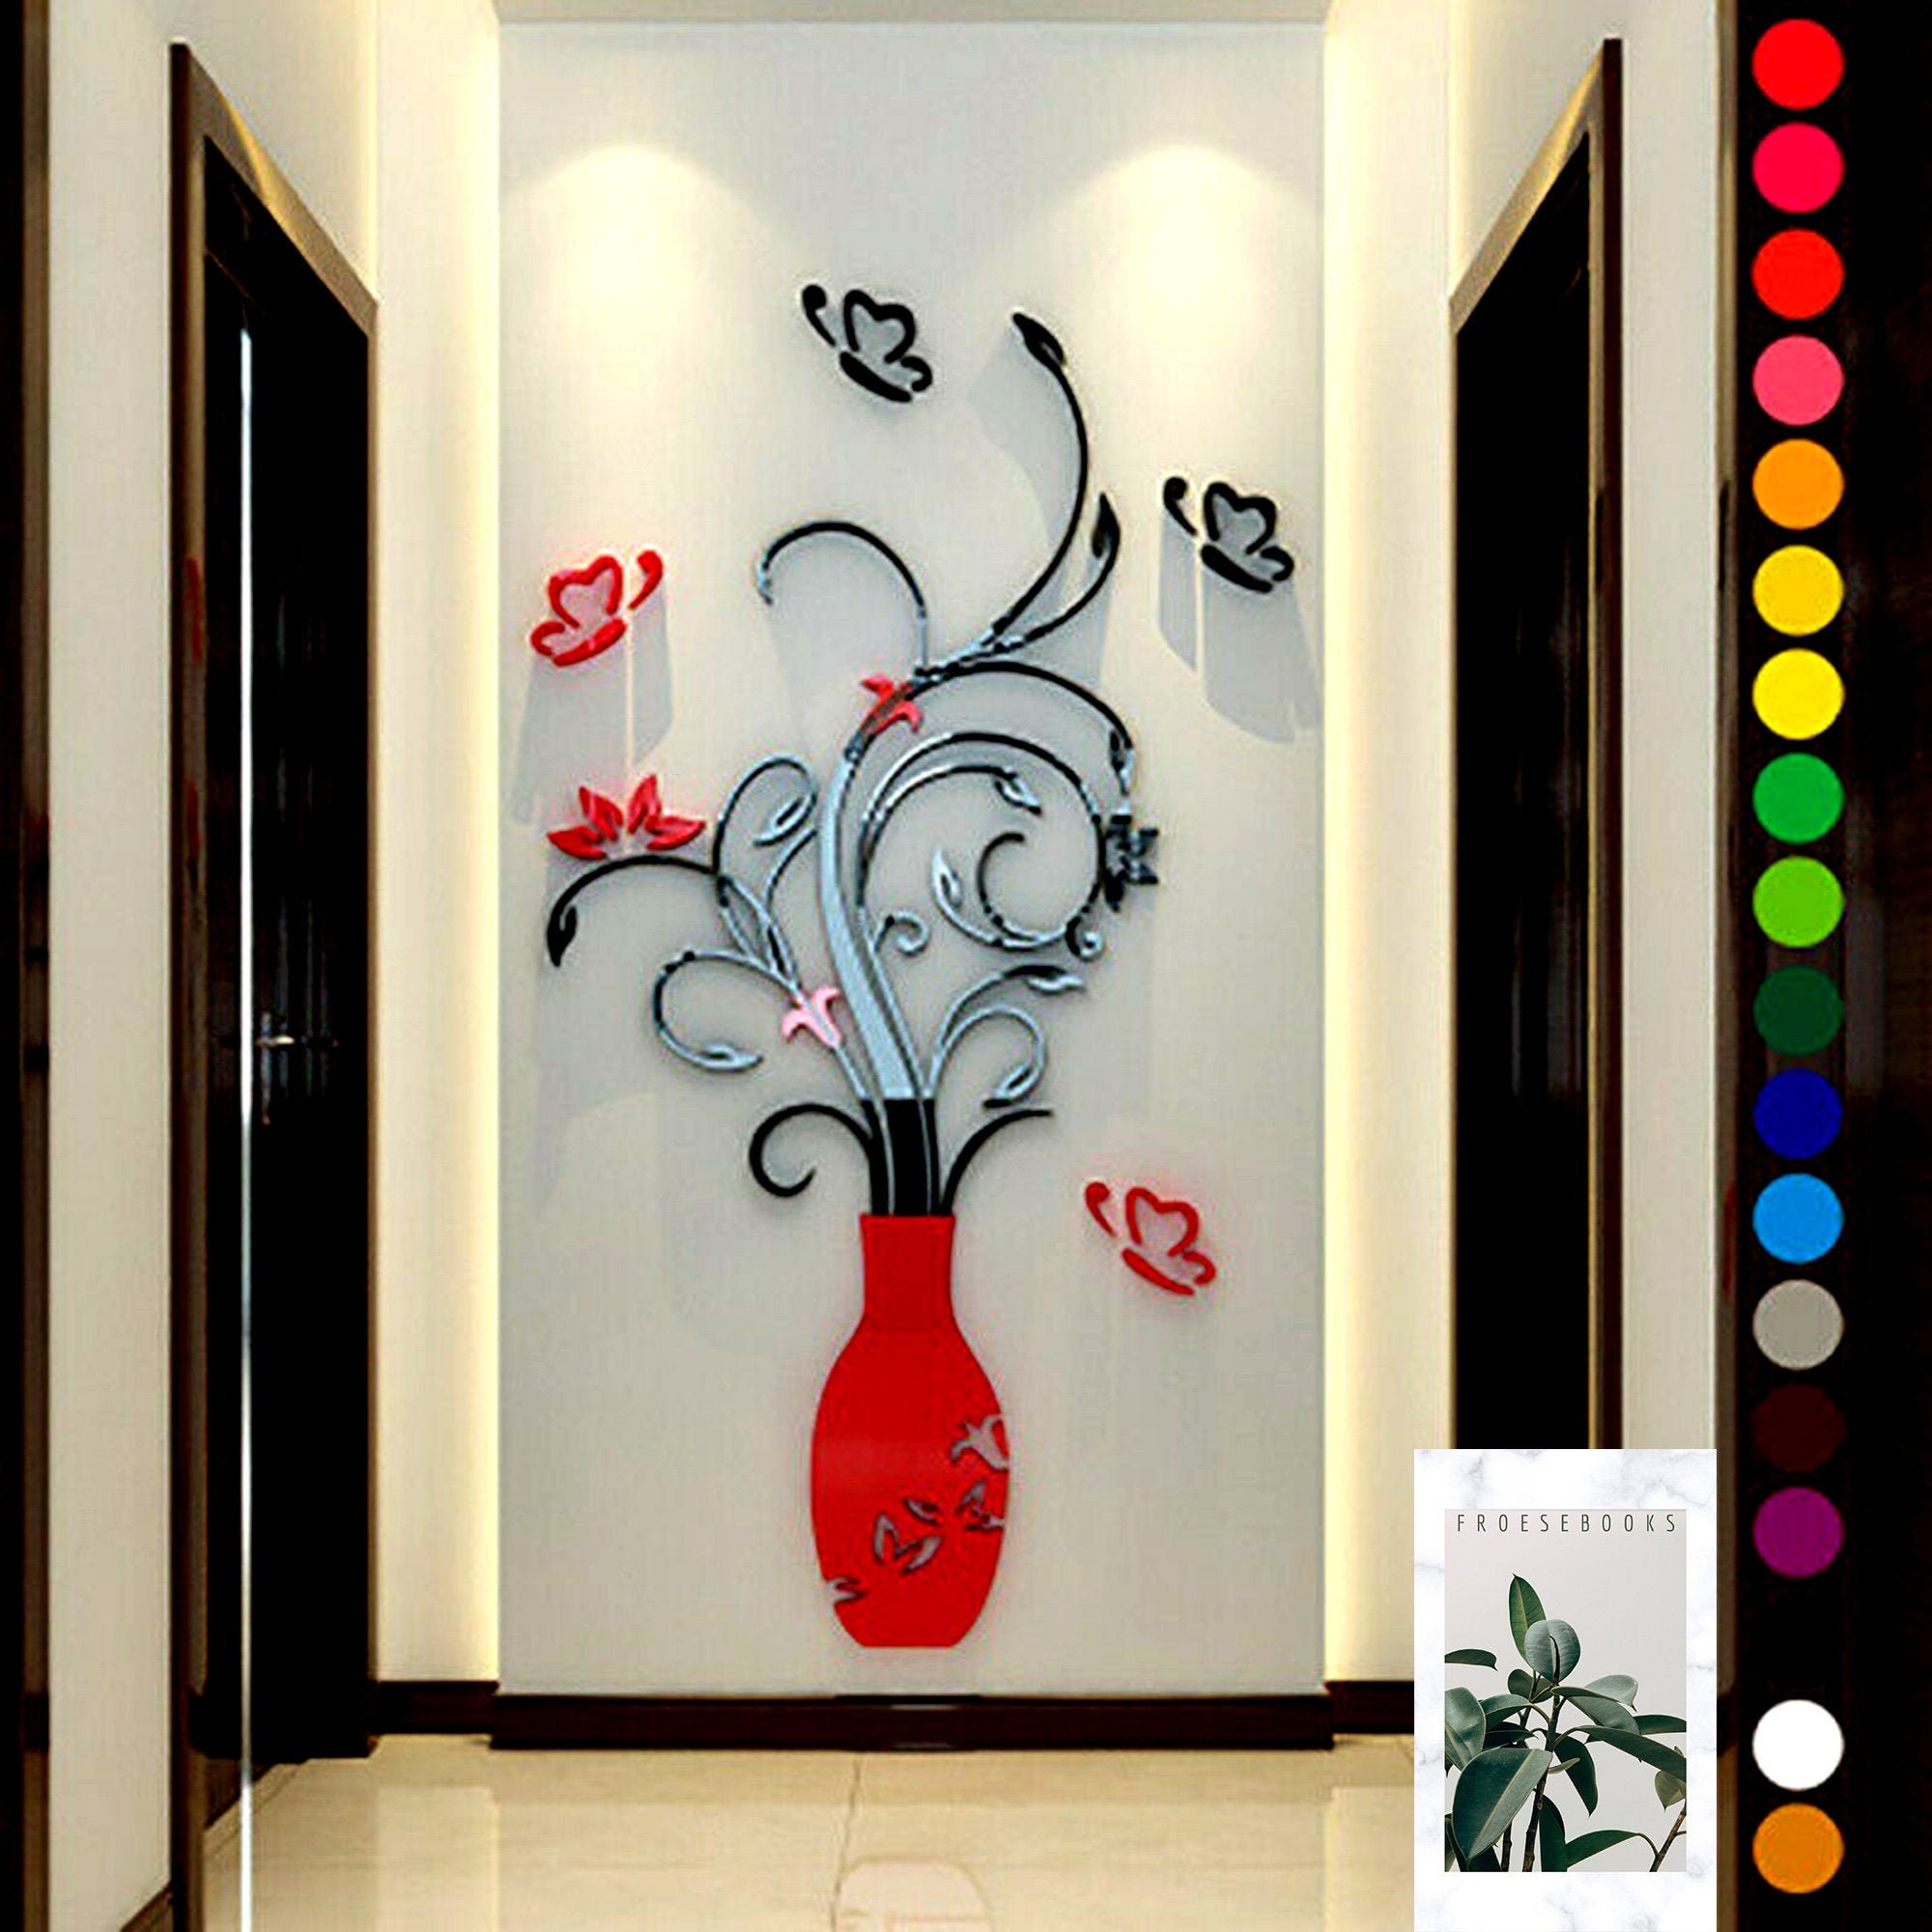 Ofanyia Simulation Plant Vase Wall Stickers Removable 3D Wall Sticker Home Refrigerator Cabinet Decoration DIY Superposition Floral Stickers Self-Adhesive Vase Theme Flower Wall Decal Decor 